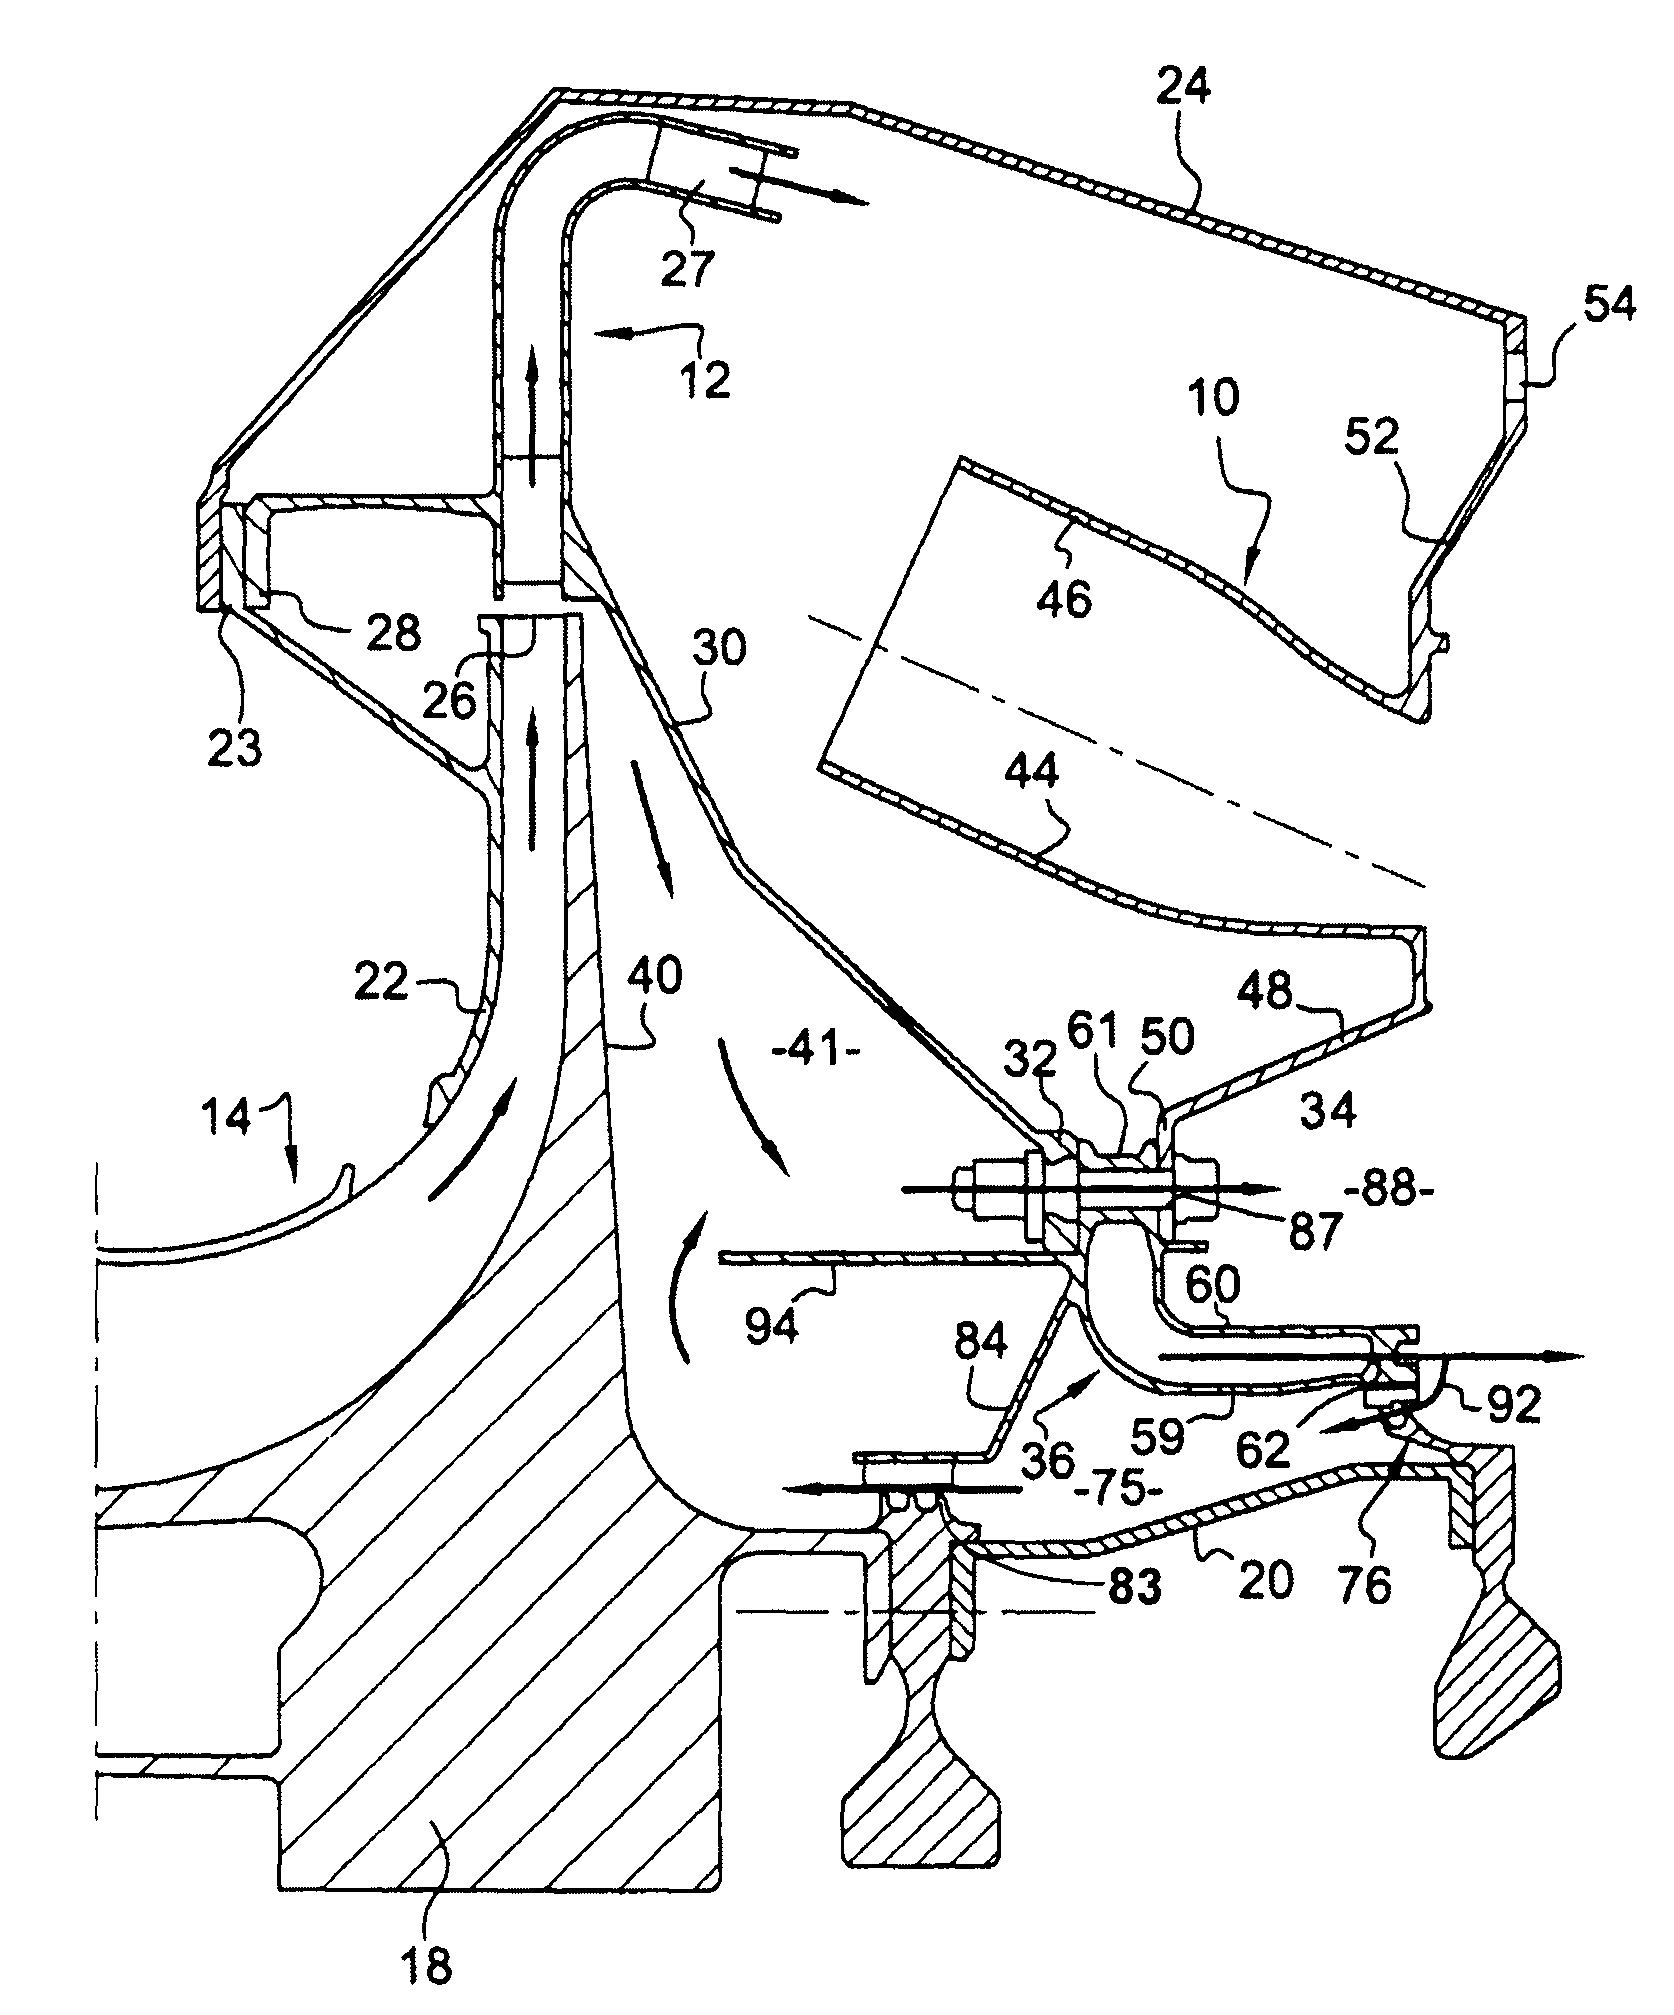 Turbomachine comprising a system for cooling the downstream face of an impeller of a centrifugal compressor